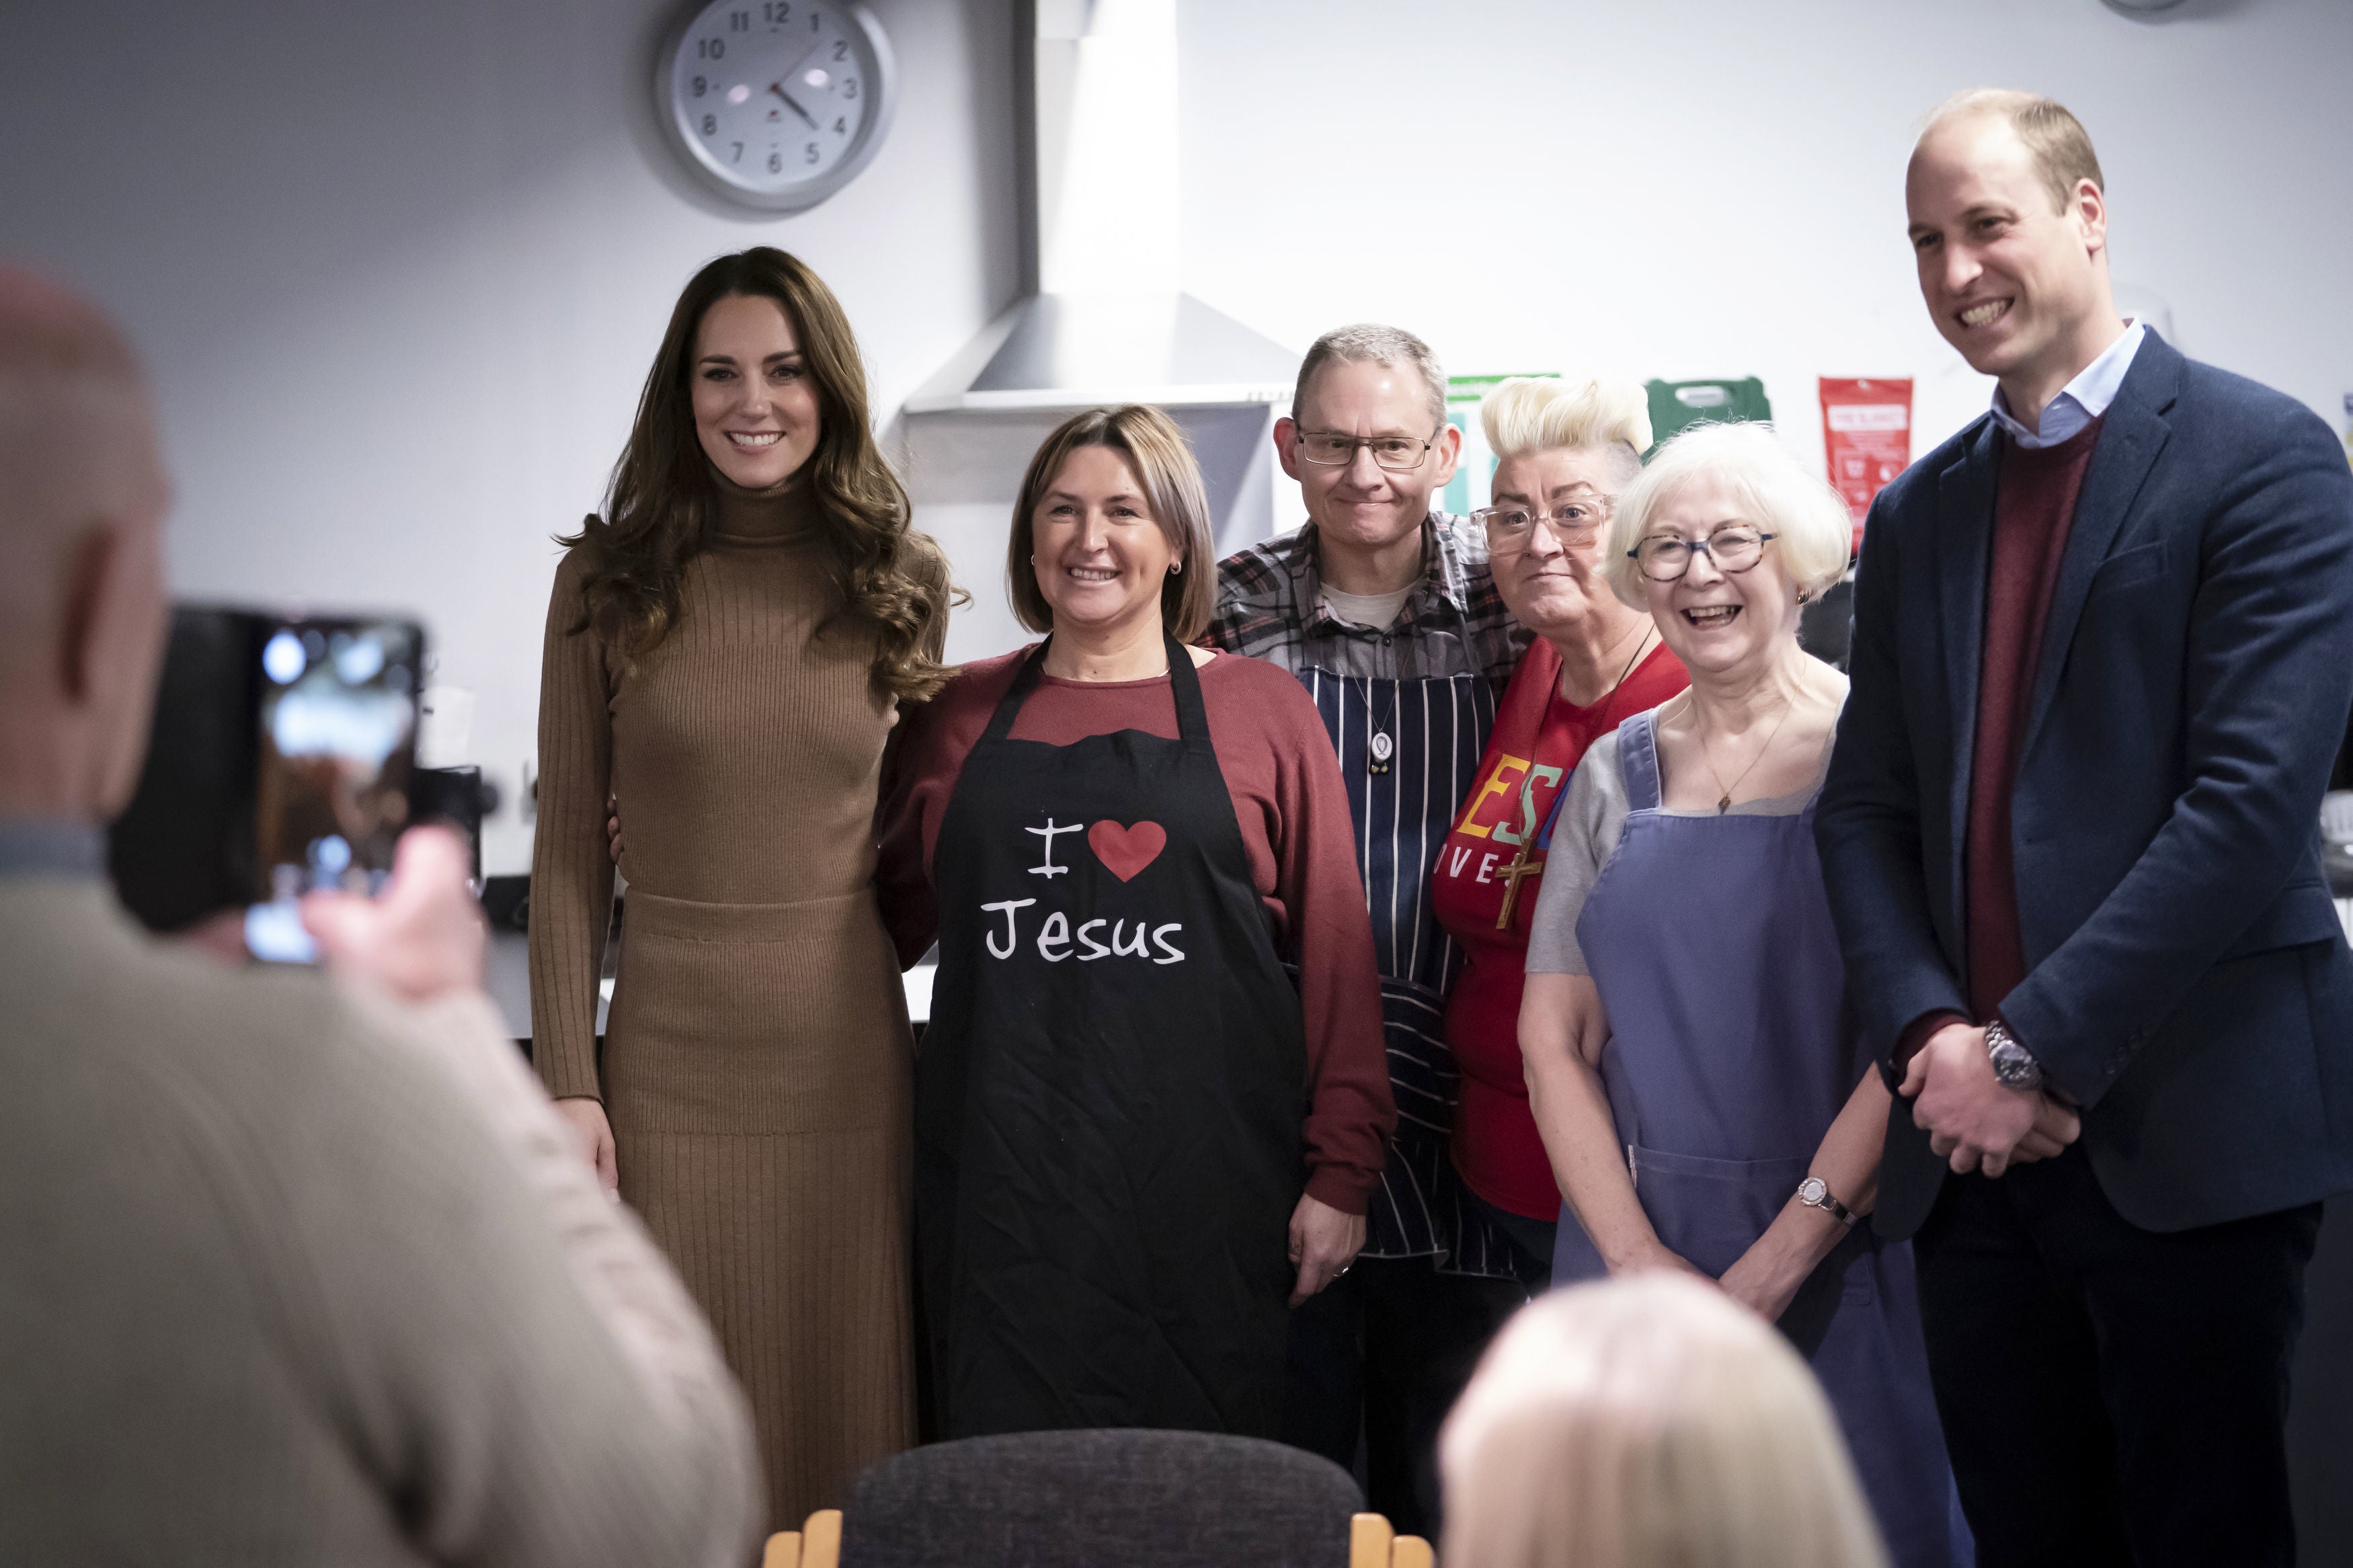 The Duke and Duchess of Cambridge during a visit to Church on the Street, in Burnley (Danny Lawson/PA)